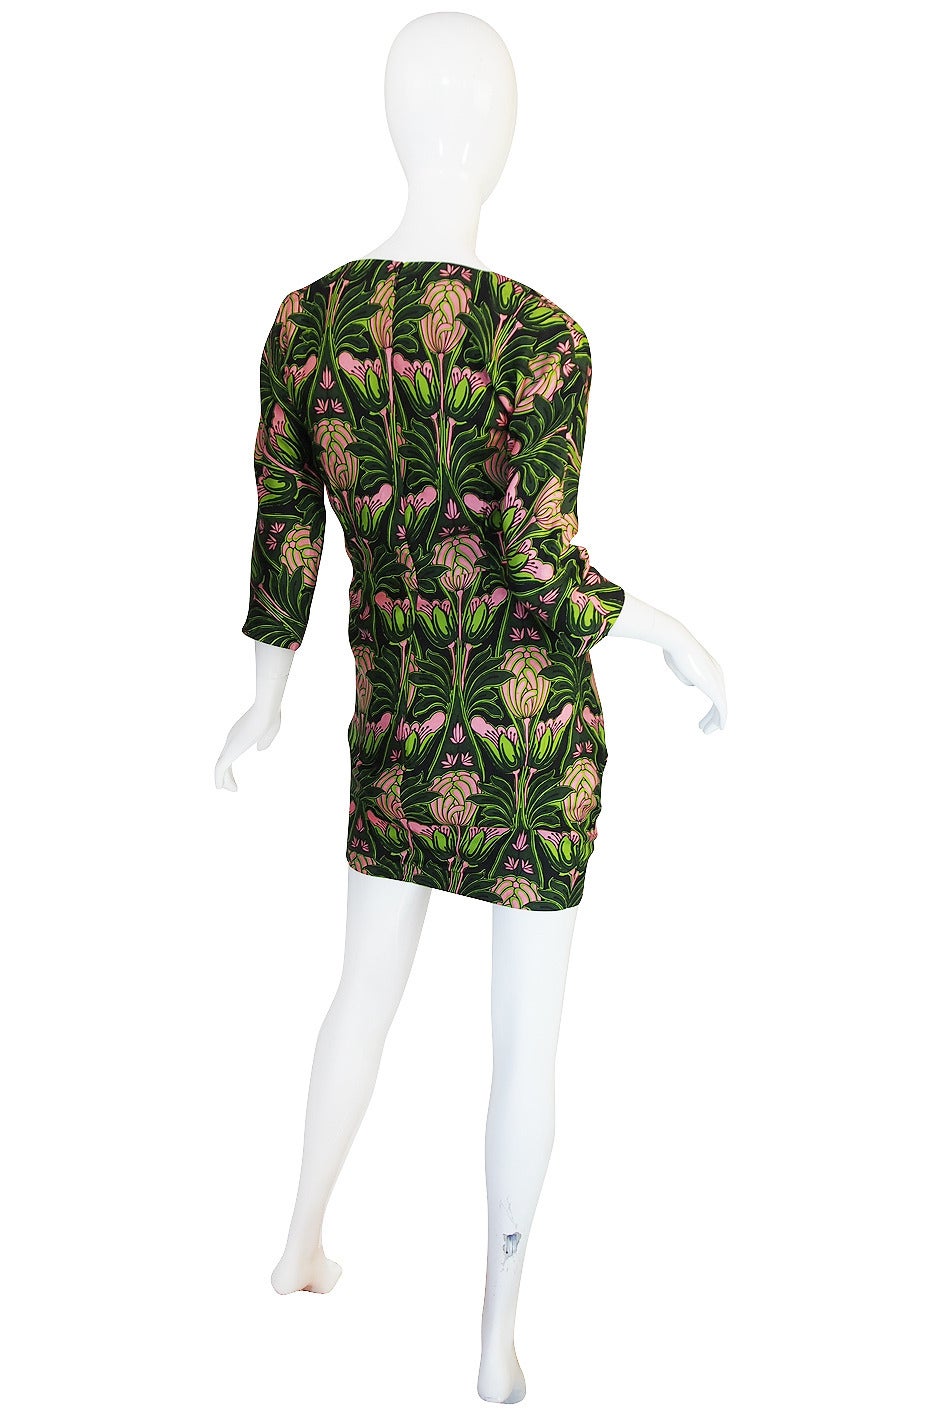 For the Prada collector this dress will be instantly recognizable. From the runway of the F/W 2003 collection is that fabulous little dress done in a floral silk whose print was reissued from the 1960 Holliday & Brown archives. Holliday & Brown was